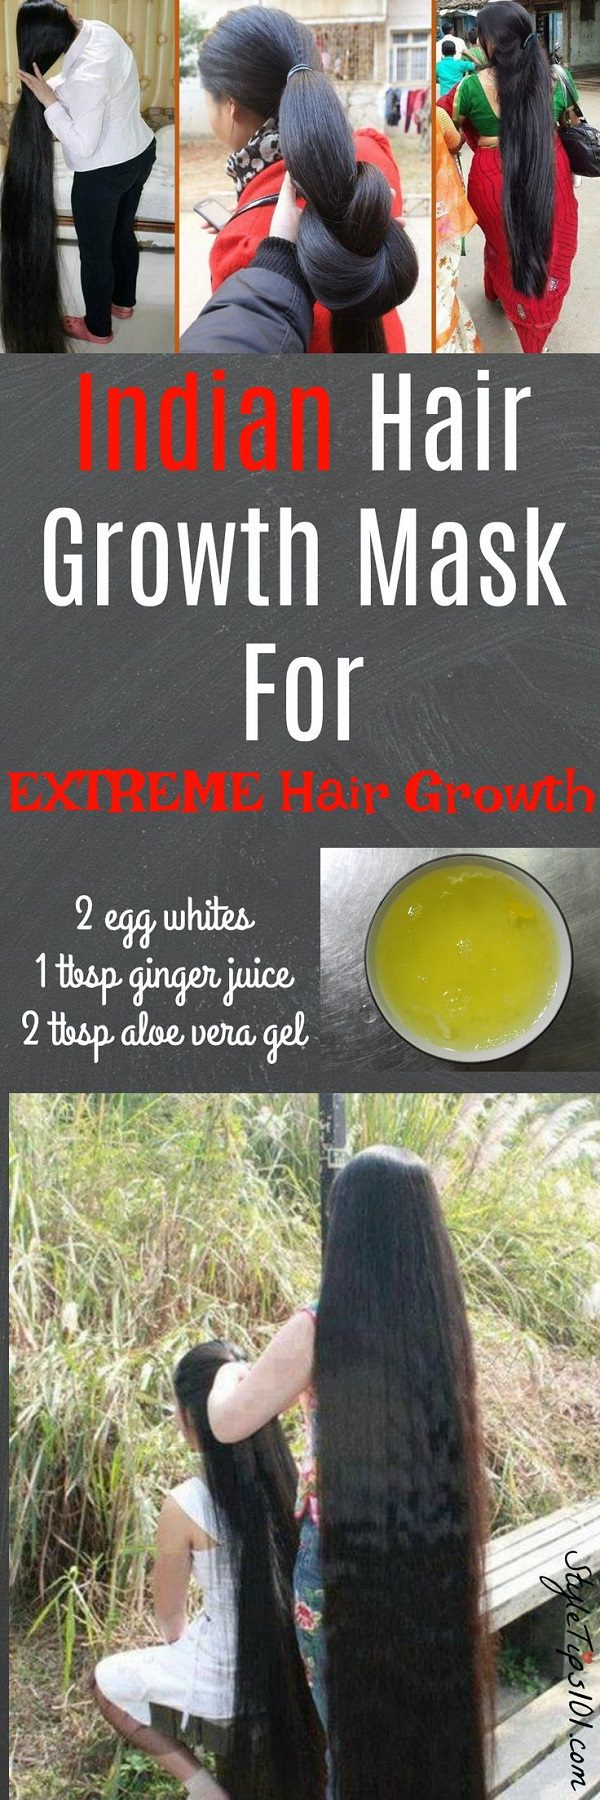 This DIY Hair Mask strengthen dry, brittle strands, moisturize the scalp, and enrich the hair with proteins.